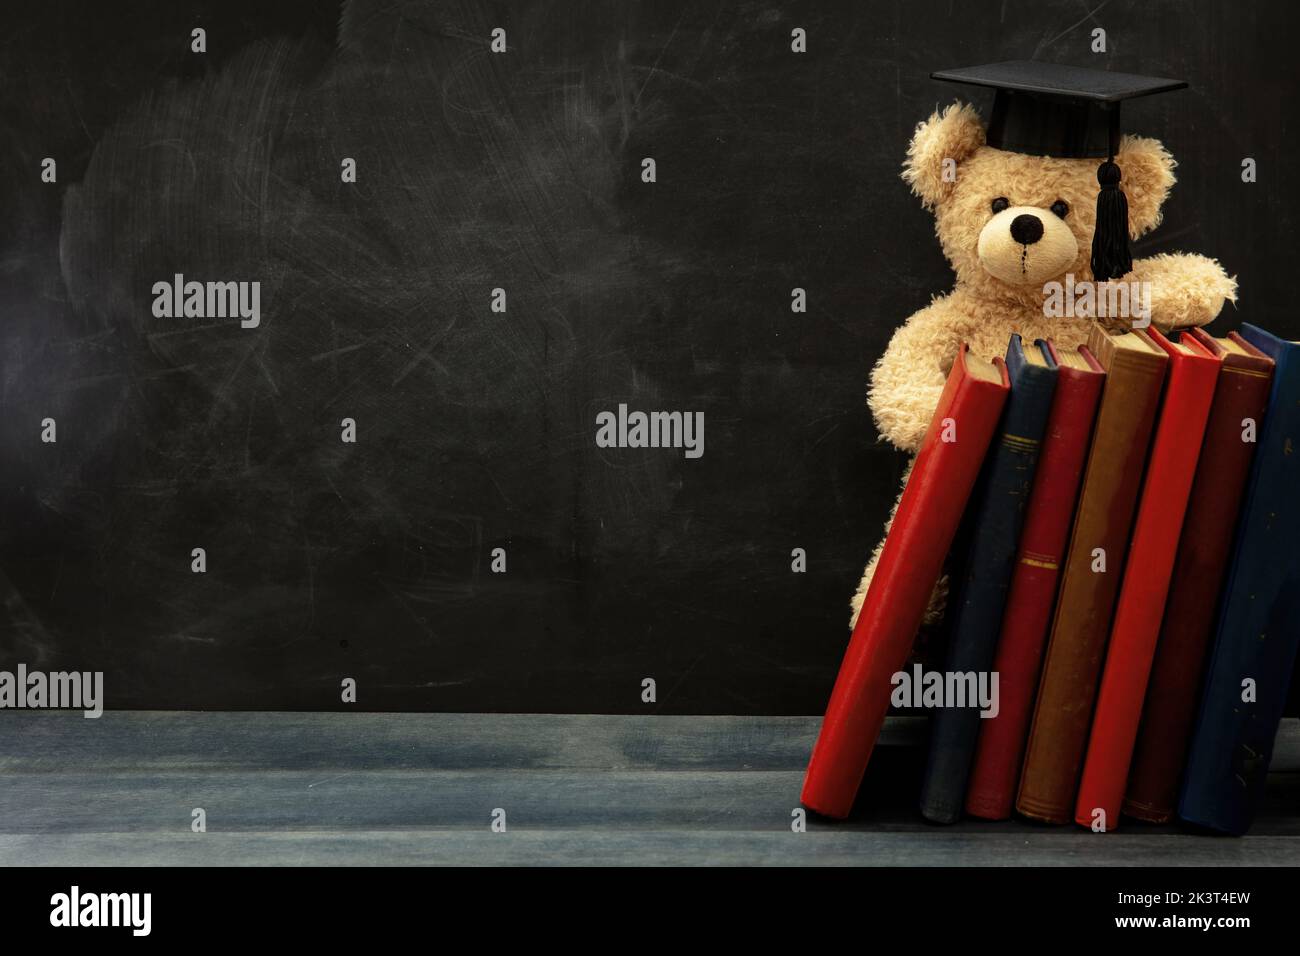 Student education concept. Teddy bear with graduation cap and school books on wooden desk. Blackboard background. Copy space Stock Photo